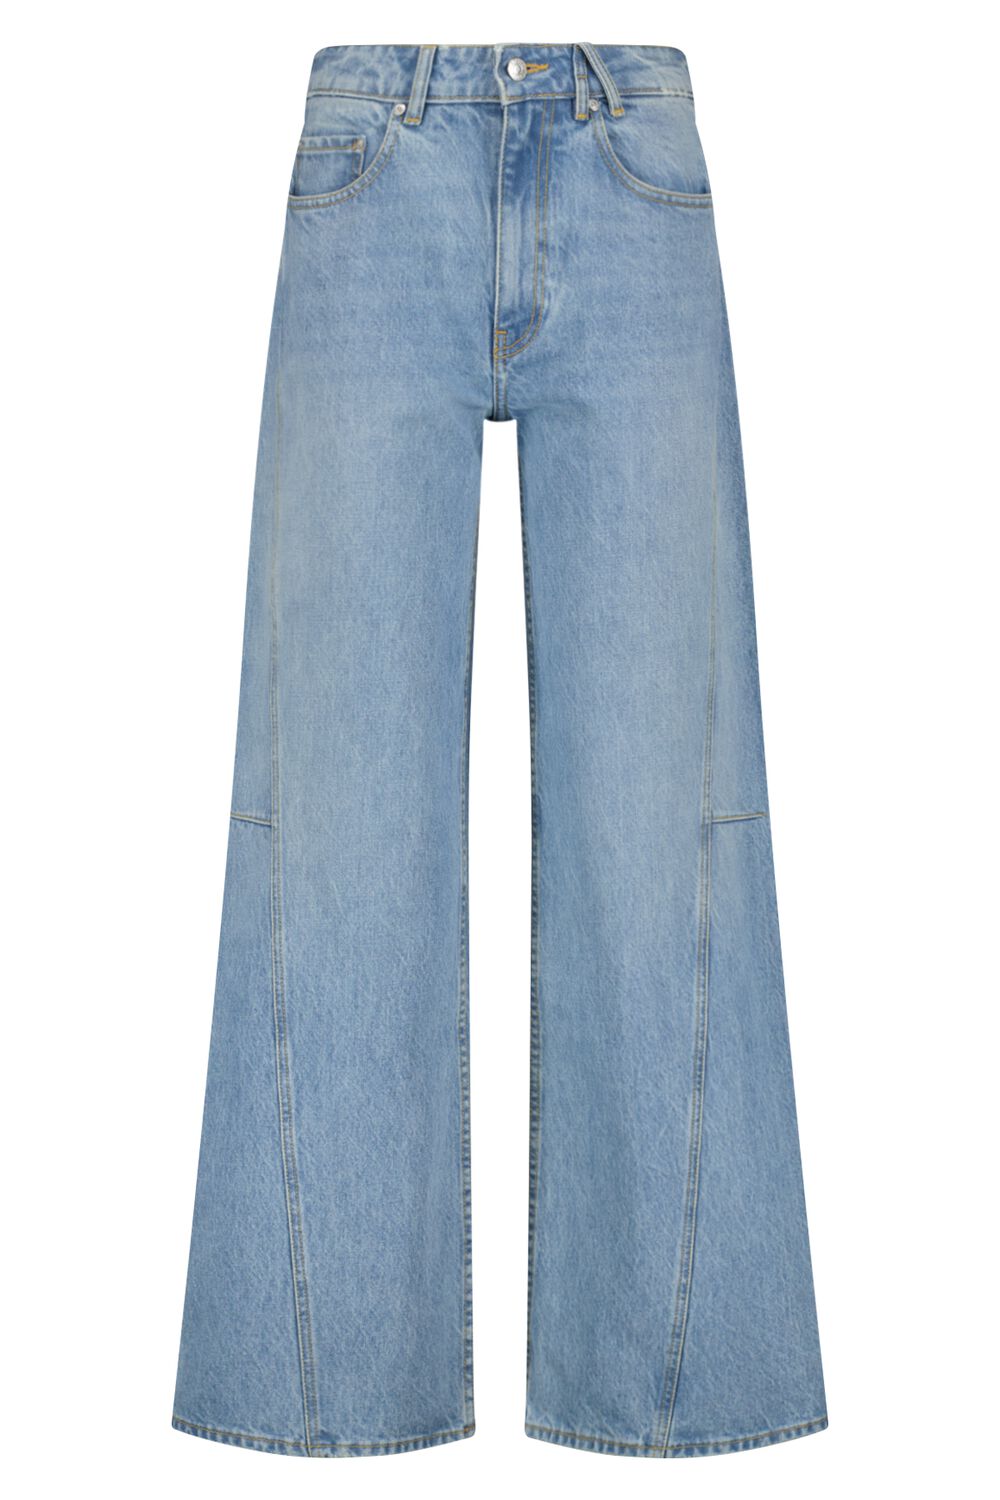 America Today Dames Jeans Seatle Blauw